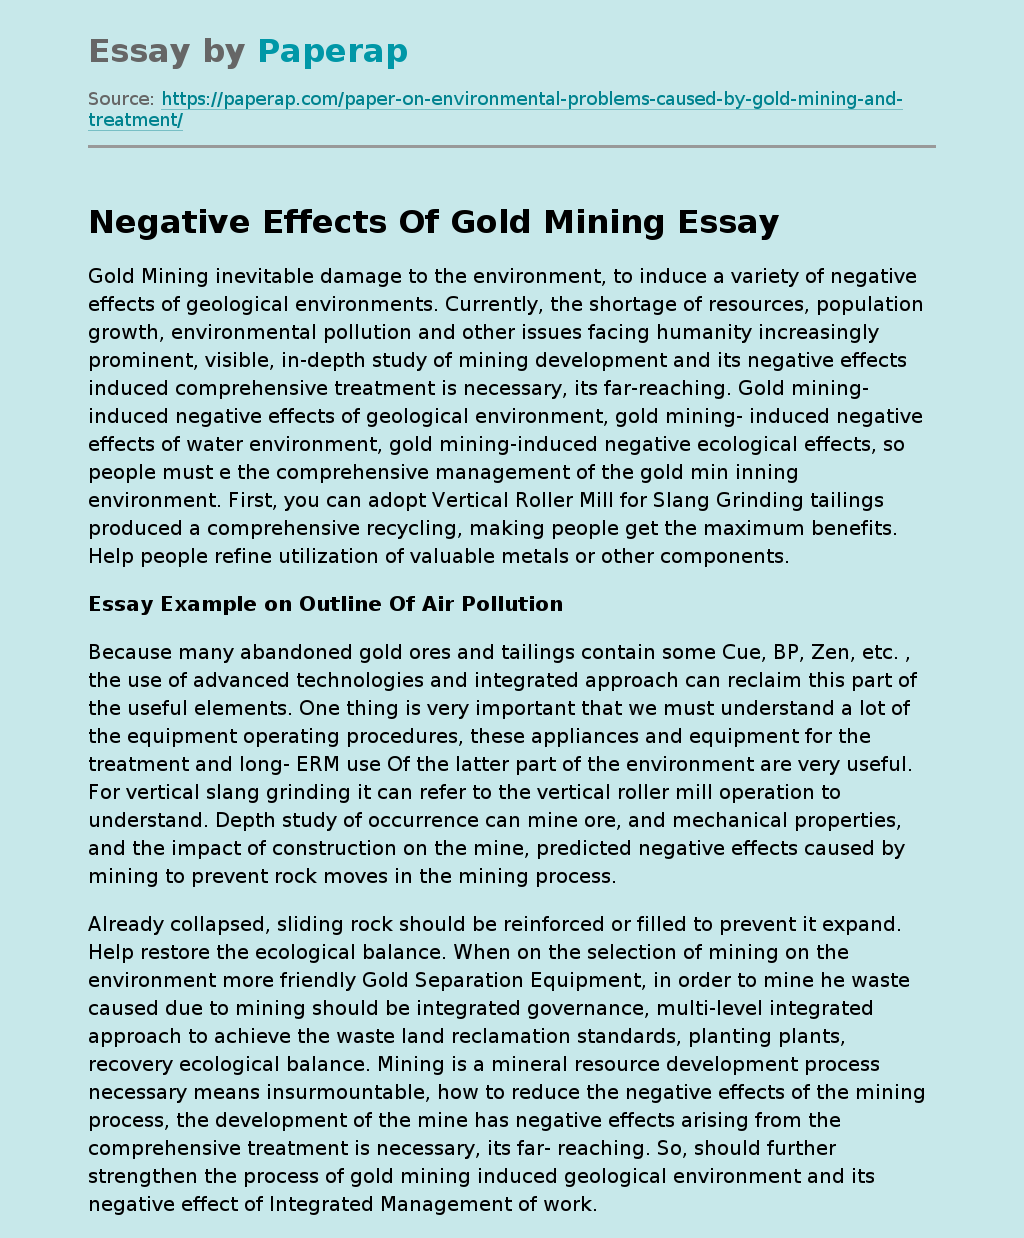 Negative Effects Of Gold Mining